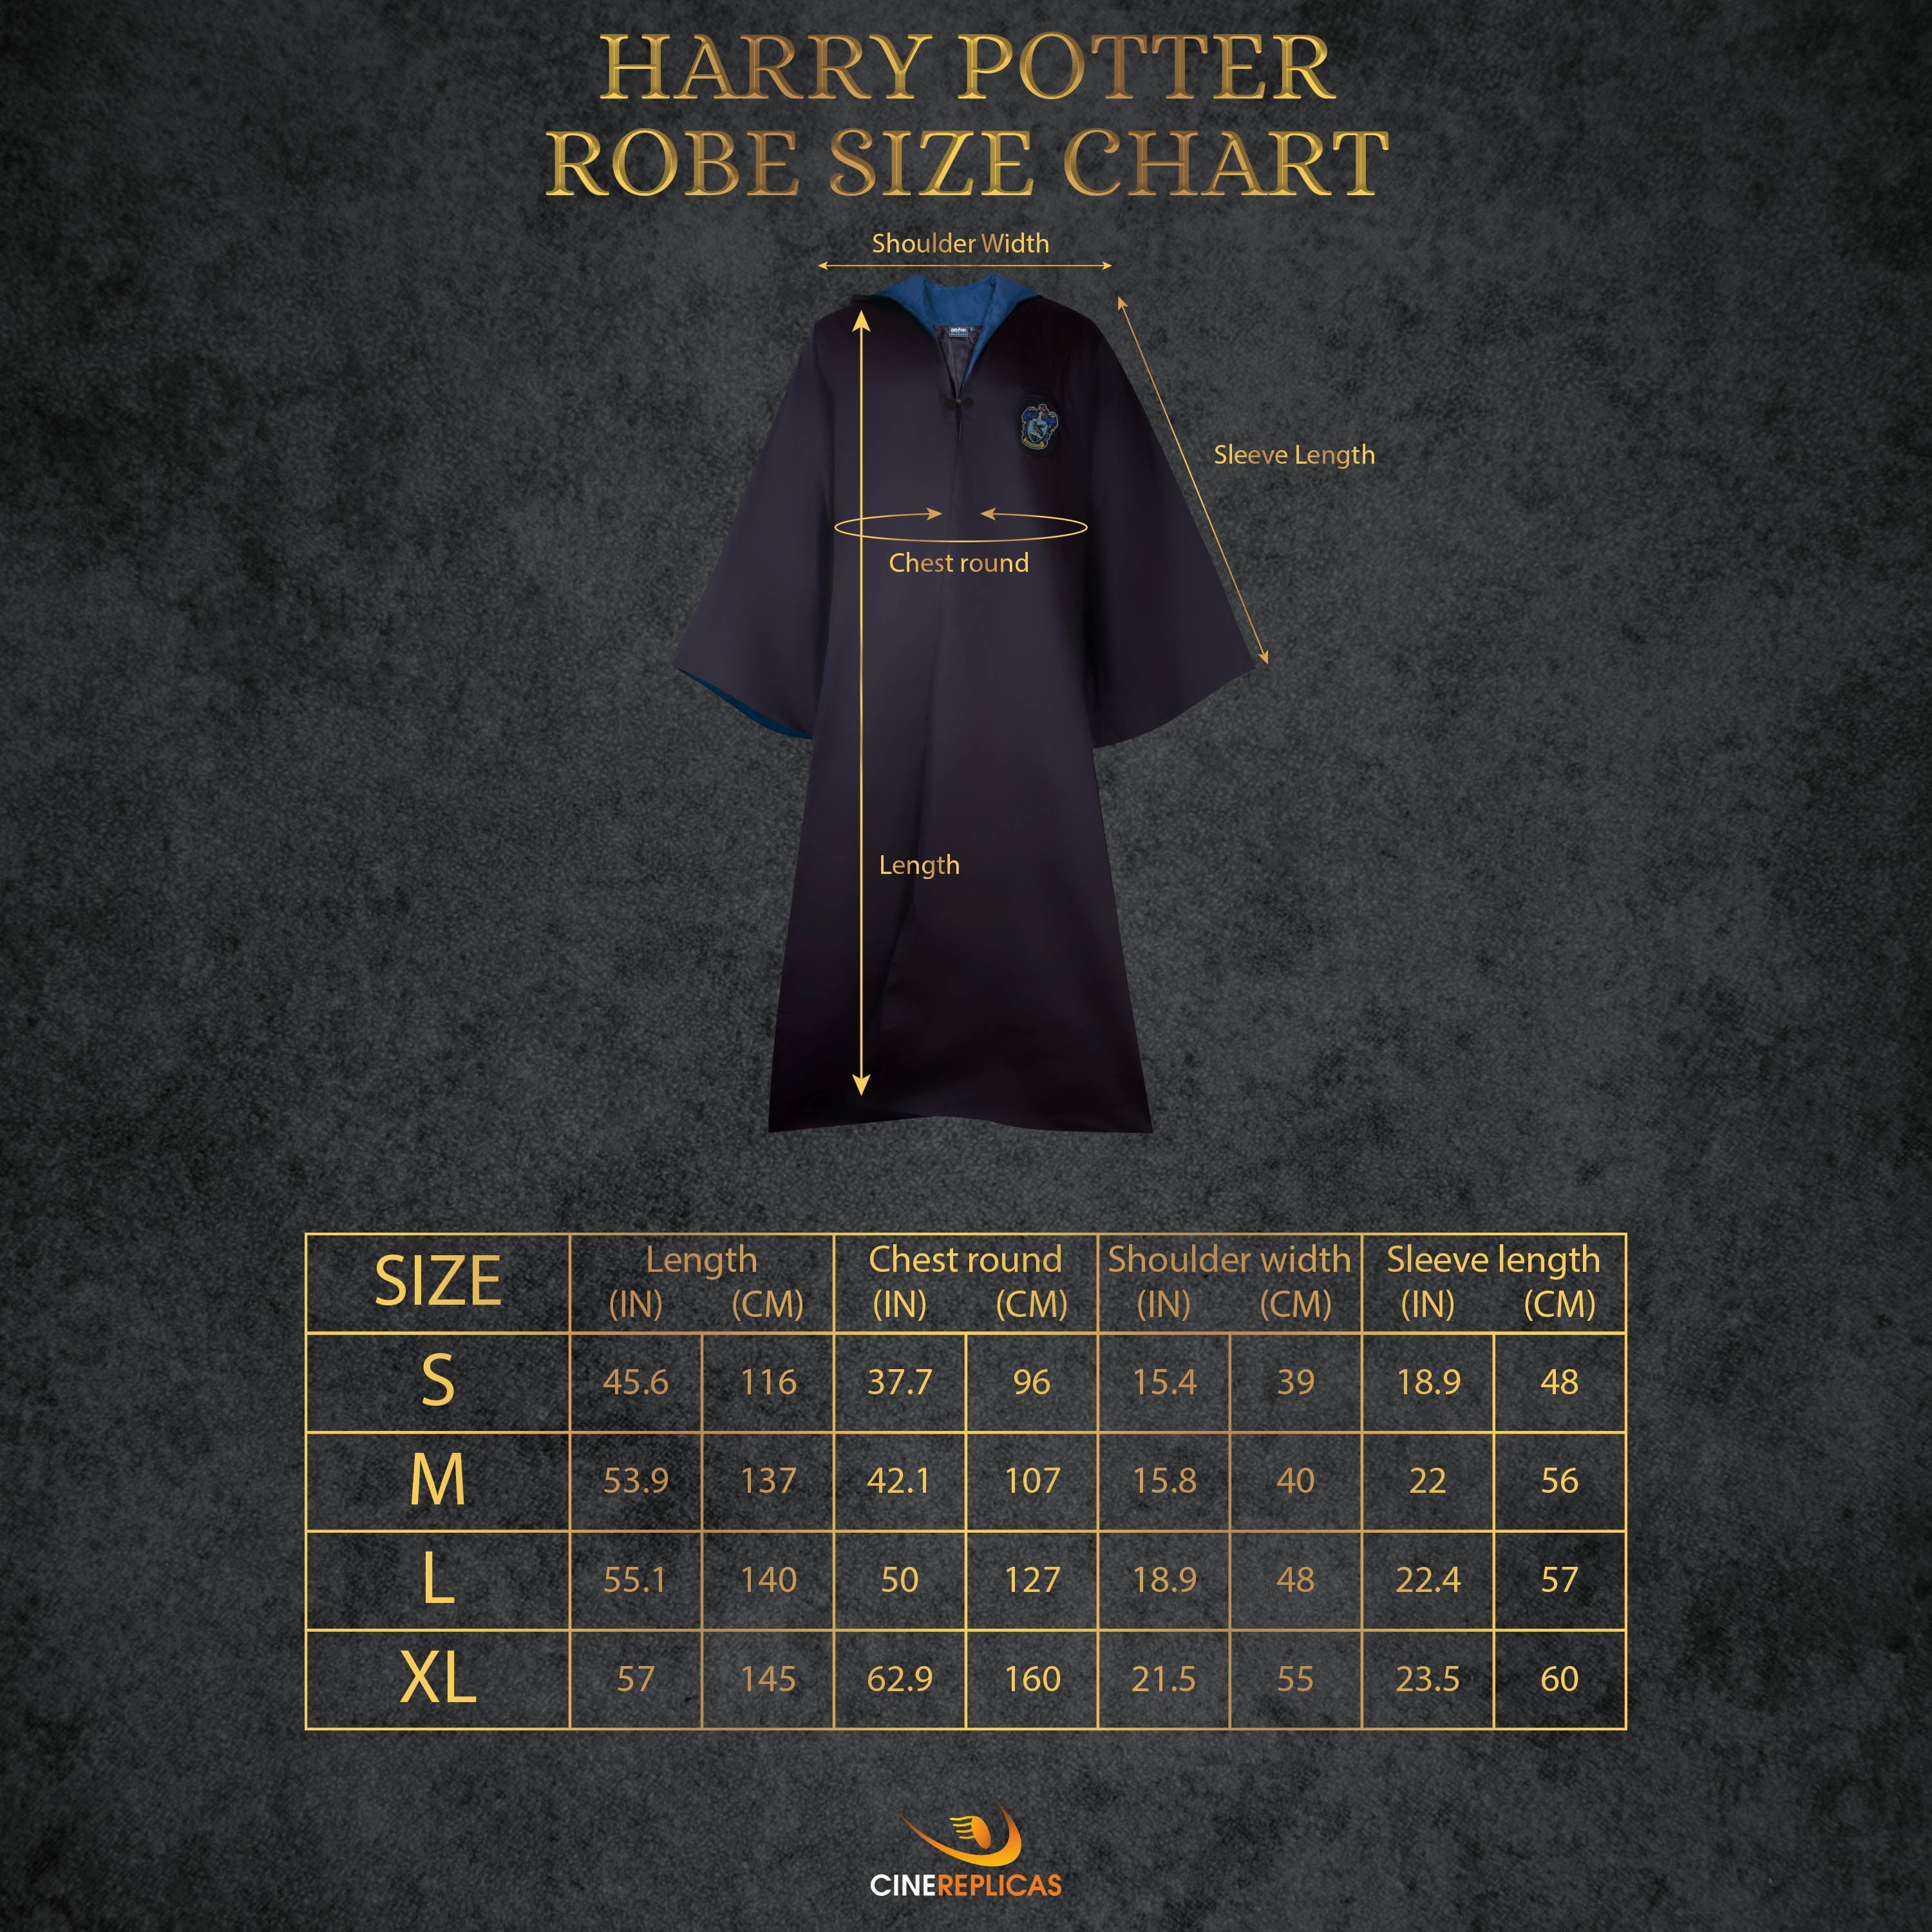 Wizard Wardrobe — Ravenclaw Uniform (requested by anon) - buy it